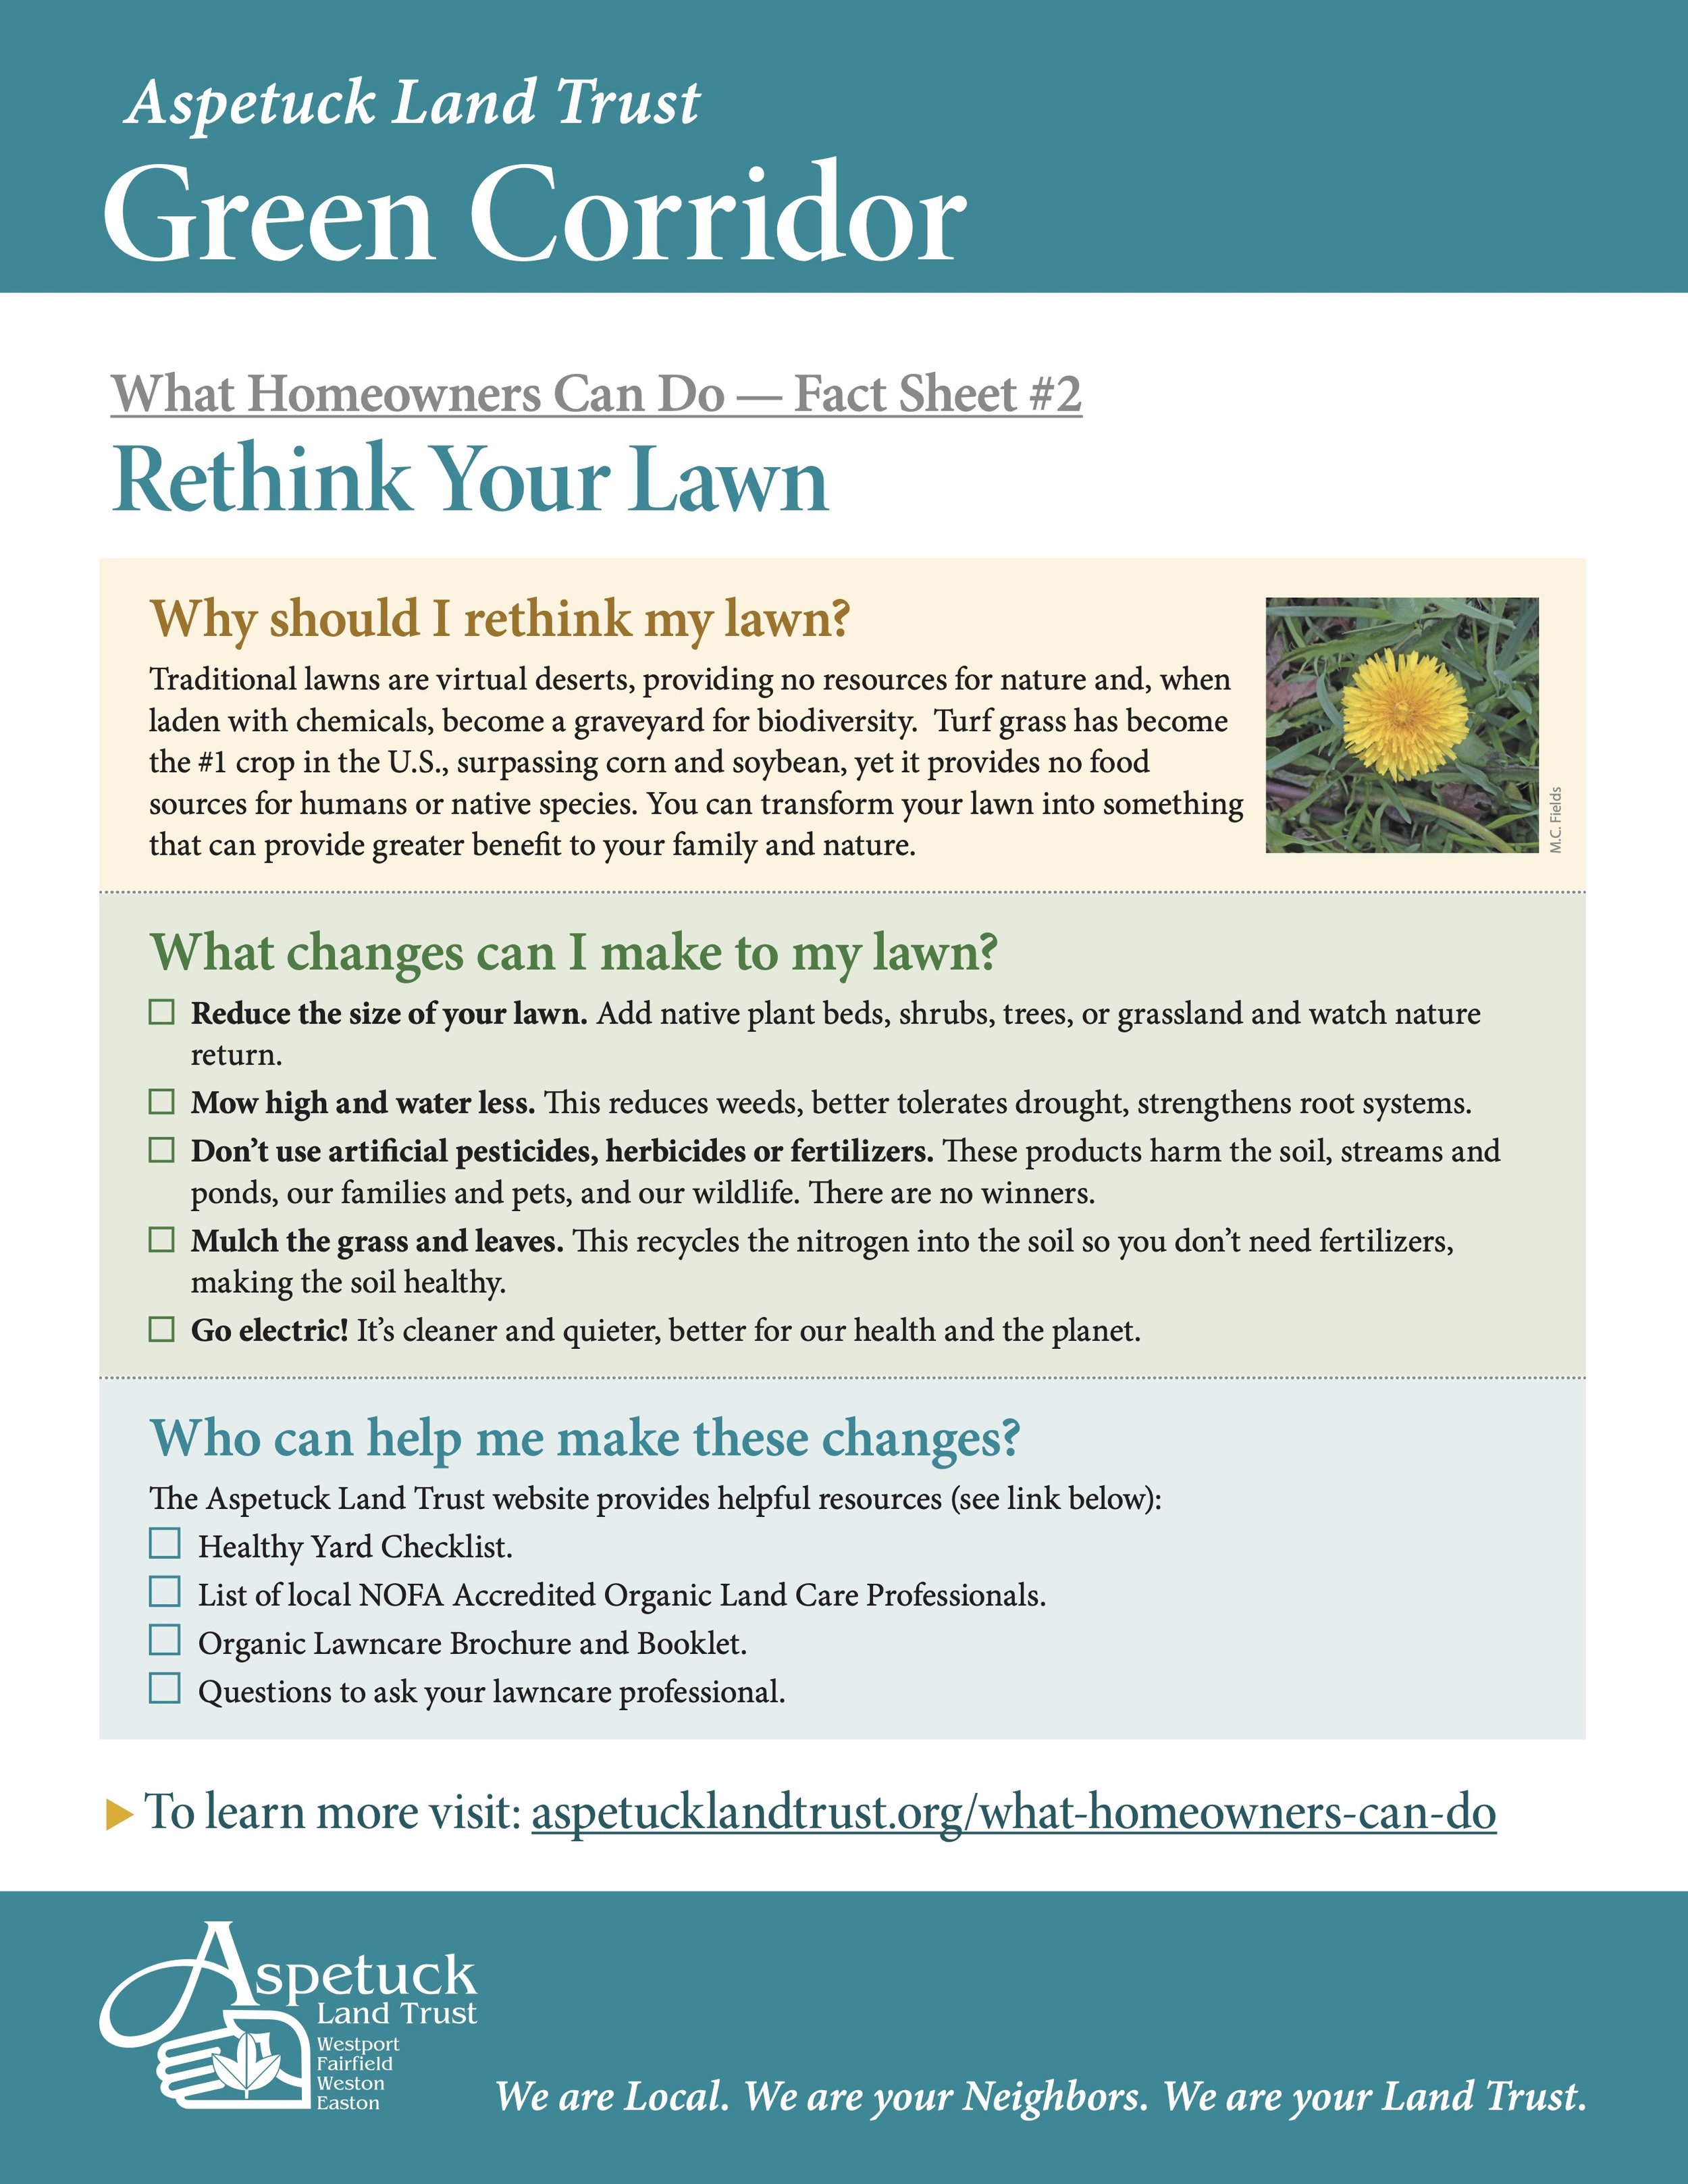 Rethink Your Lawn